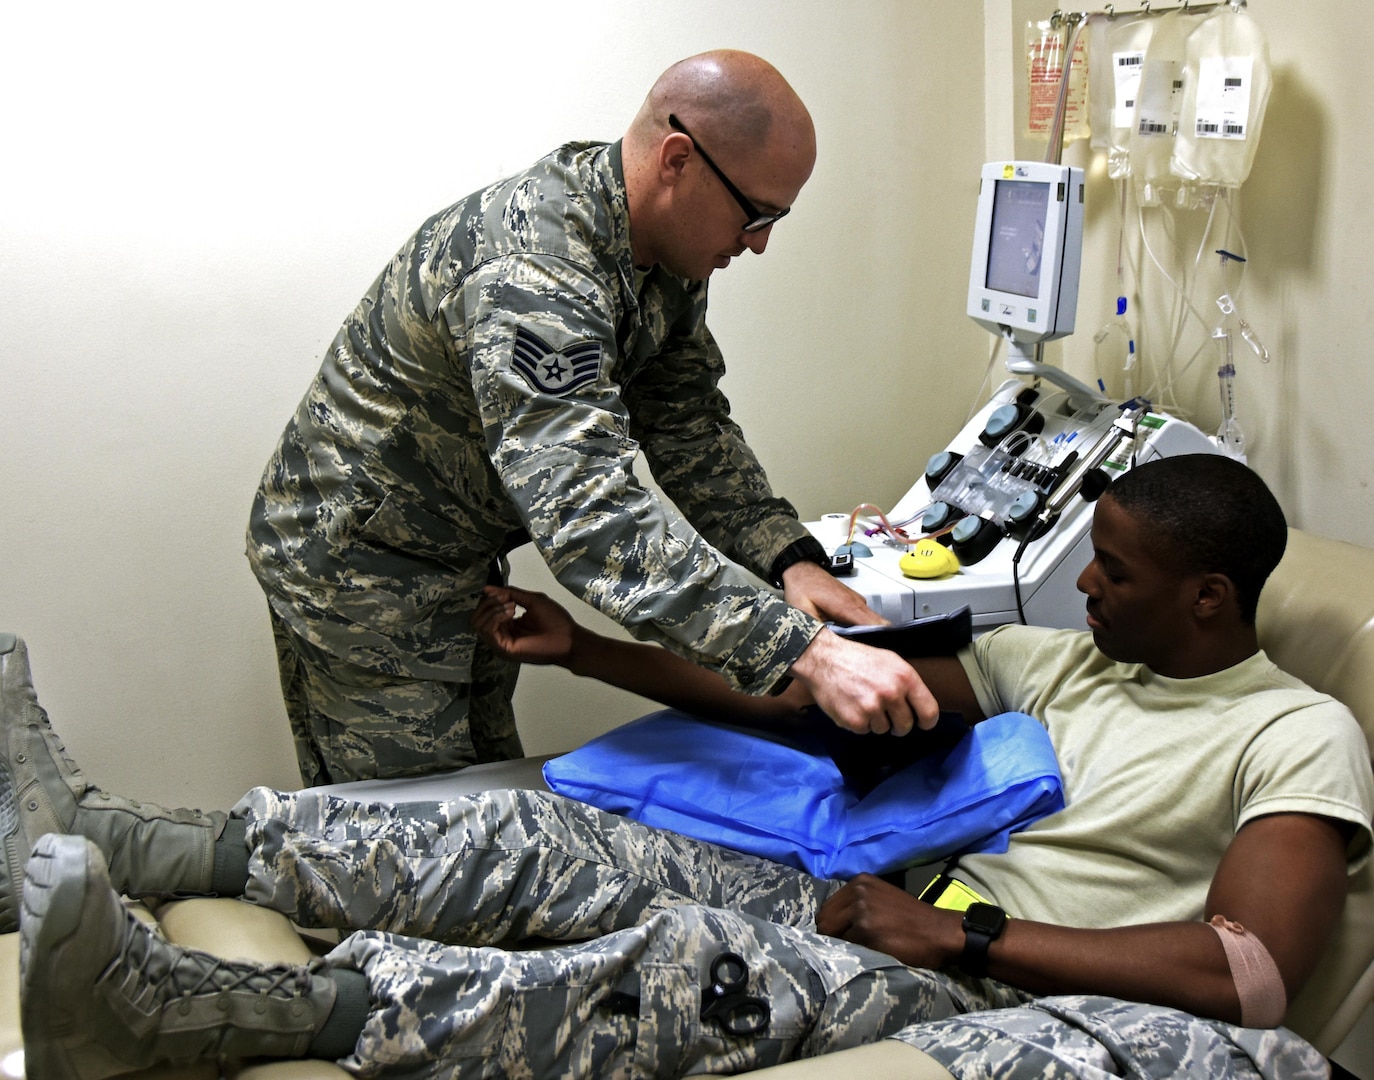 Staff Sgt. Jonathan Flannigan, NCO in charge of the apheresis element with the 379th Expeditionary Medical Group, wraps a pressure cuff around the arm of Senior Airman Jordan Marshall, an aerospace medical technician with the 379th EMDG, at Al Udeid Air Base, Qatar, March 7, 2017. Marshall volunteered to donate blood platelets which are essential to Airmen in combat zones without access to immediate medical treatment.  (U.S. Air Force photo by Senior Airman Cynthia A. Innocenti)